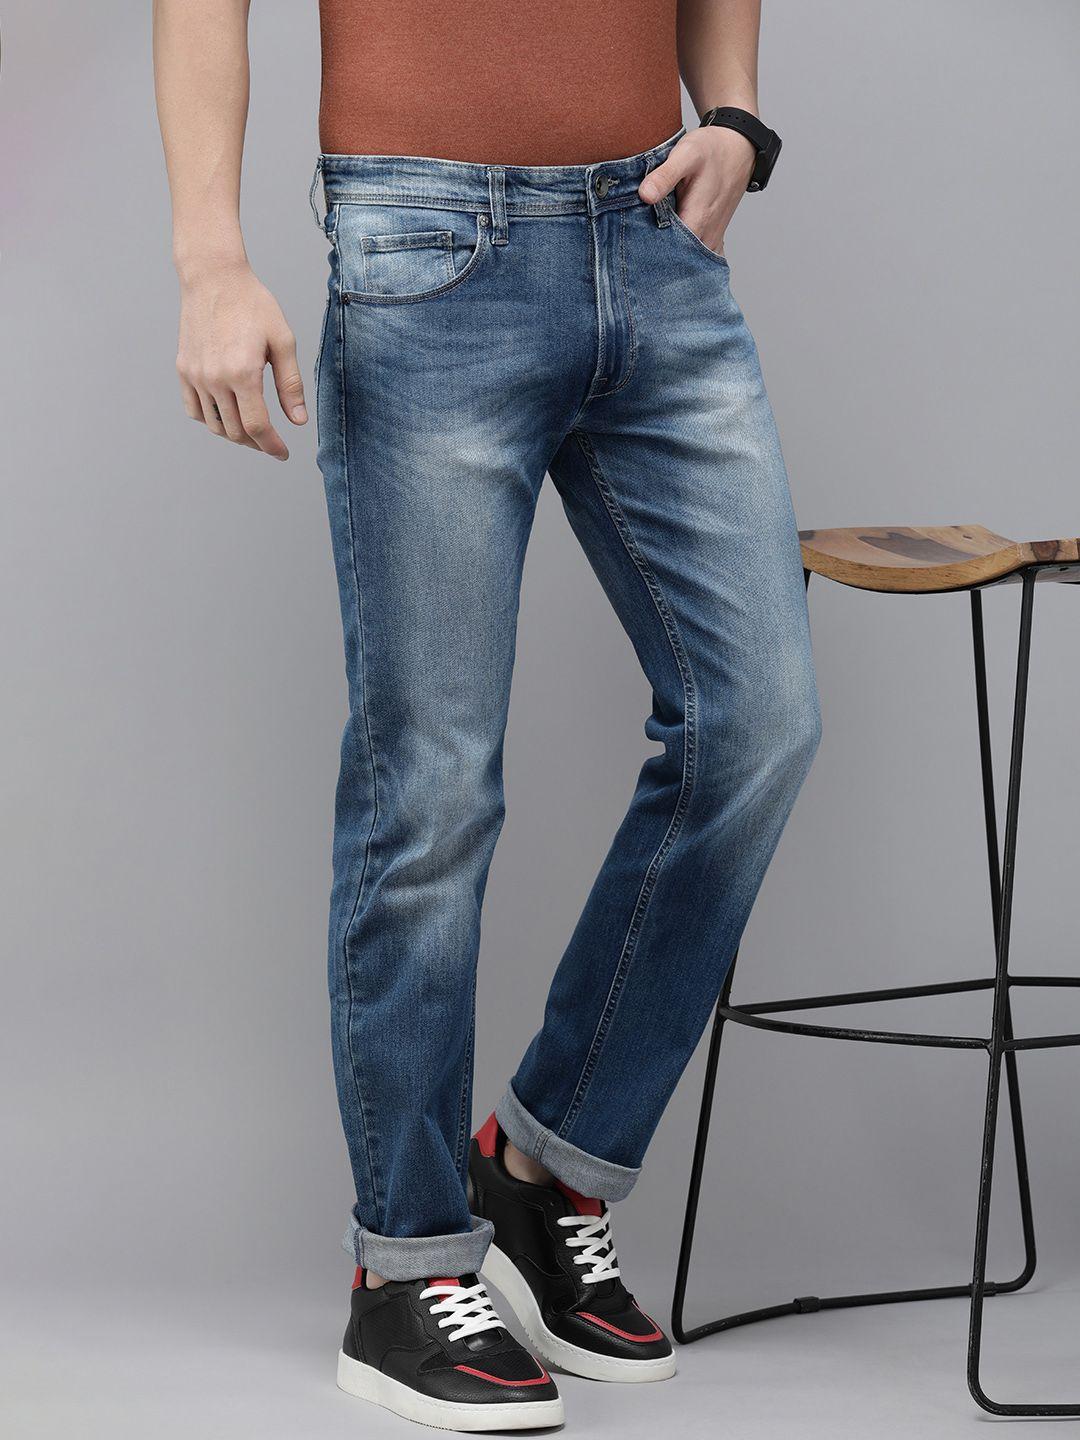 pepe-jeans-men-holborne-heavy-fade-stretchable-mid-rise-jeans